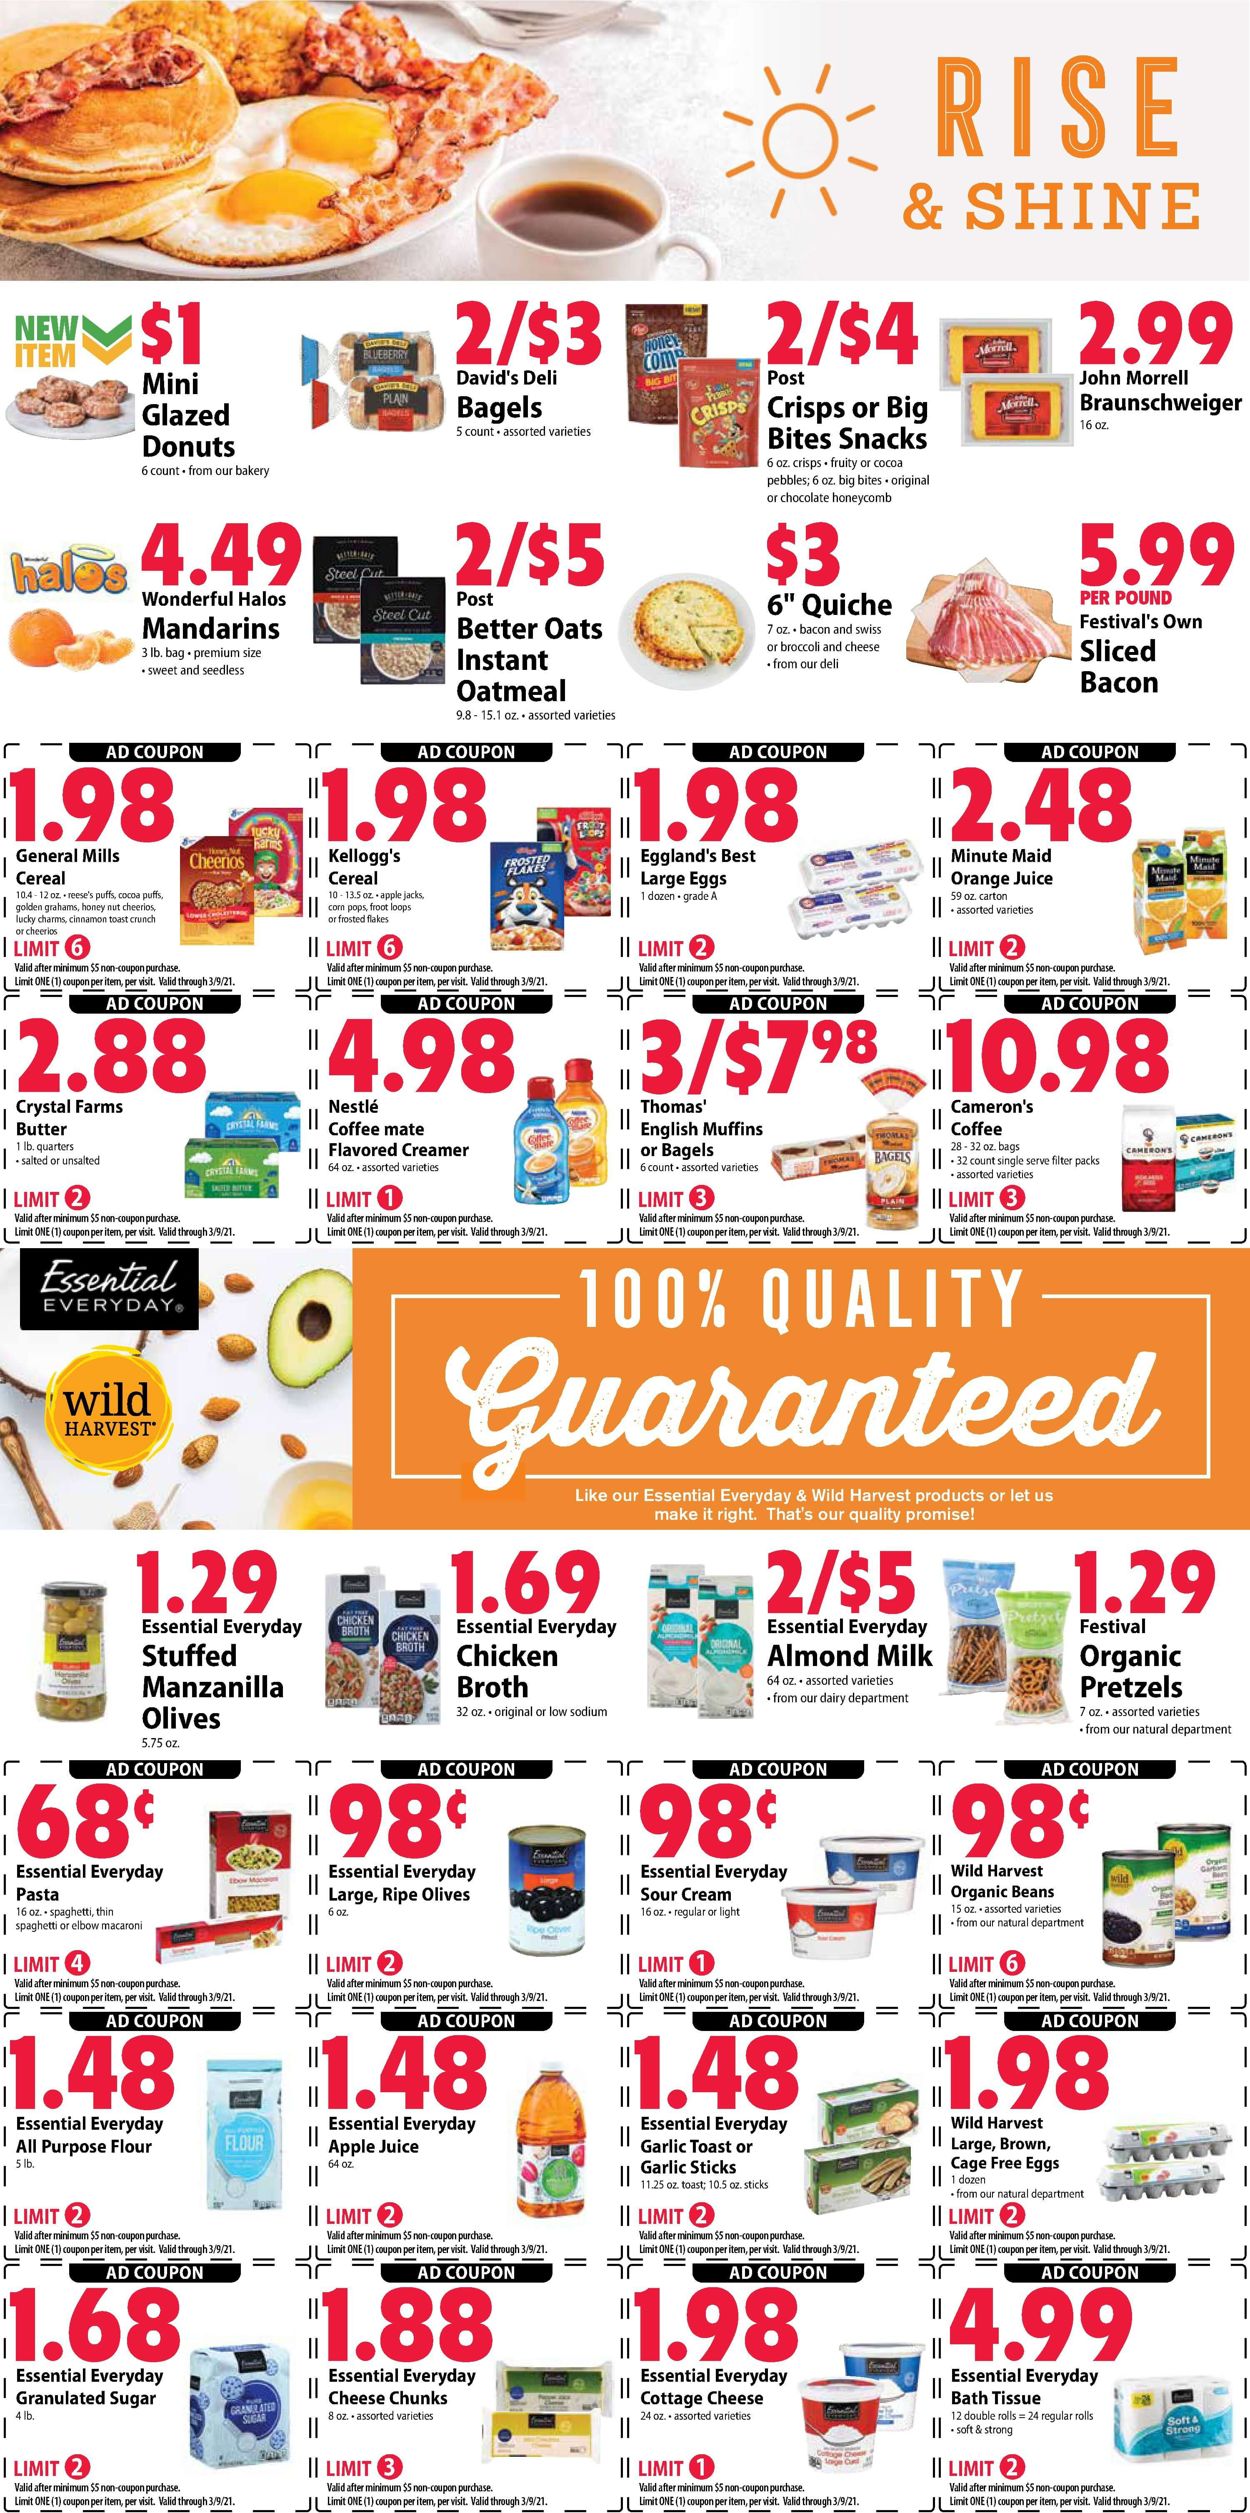 Festival Foods Current weekly ad 03/03 - 03/09/2021 [6] - frequent-ads.com